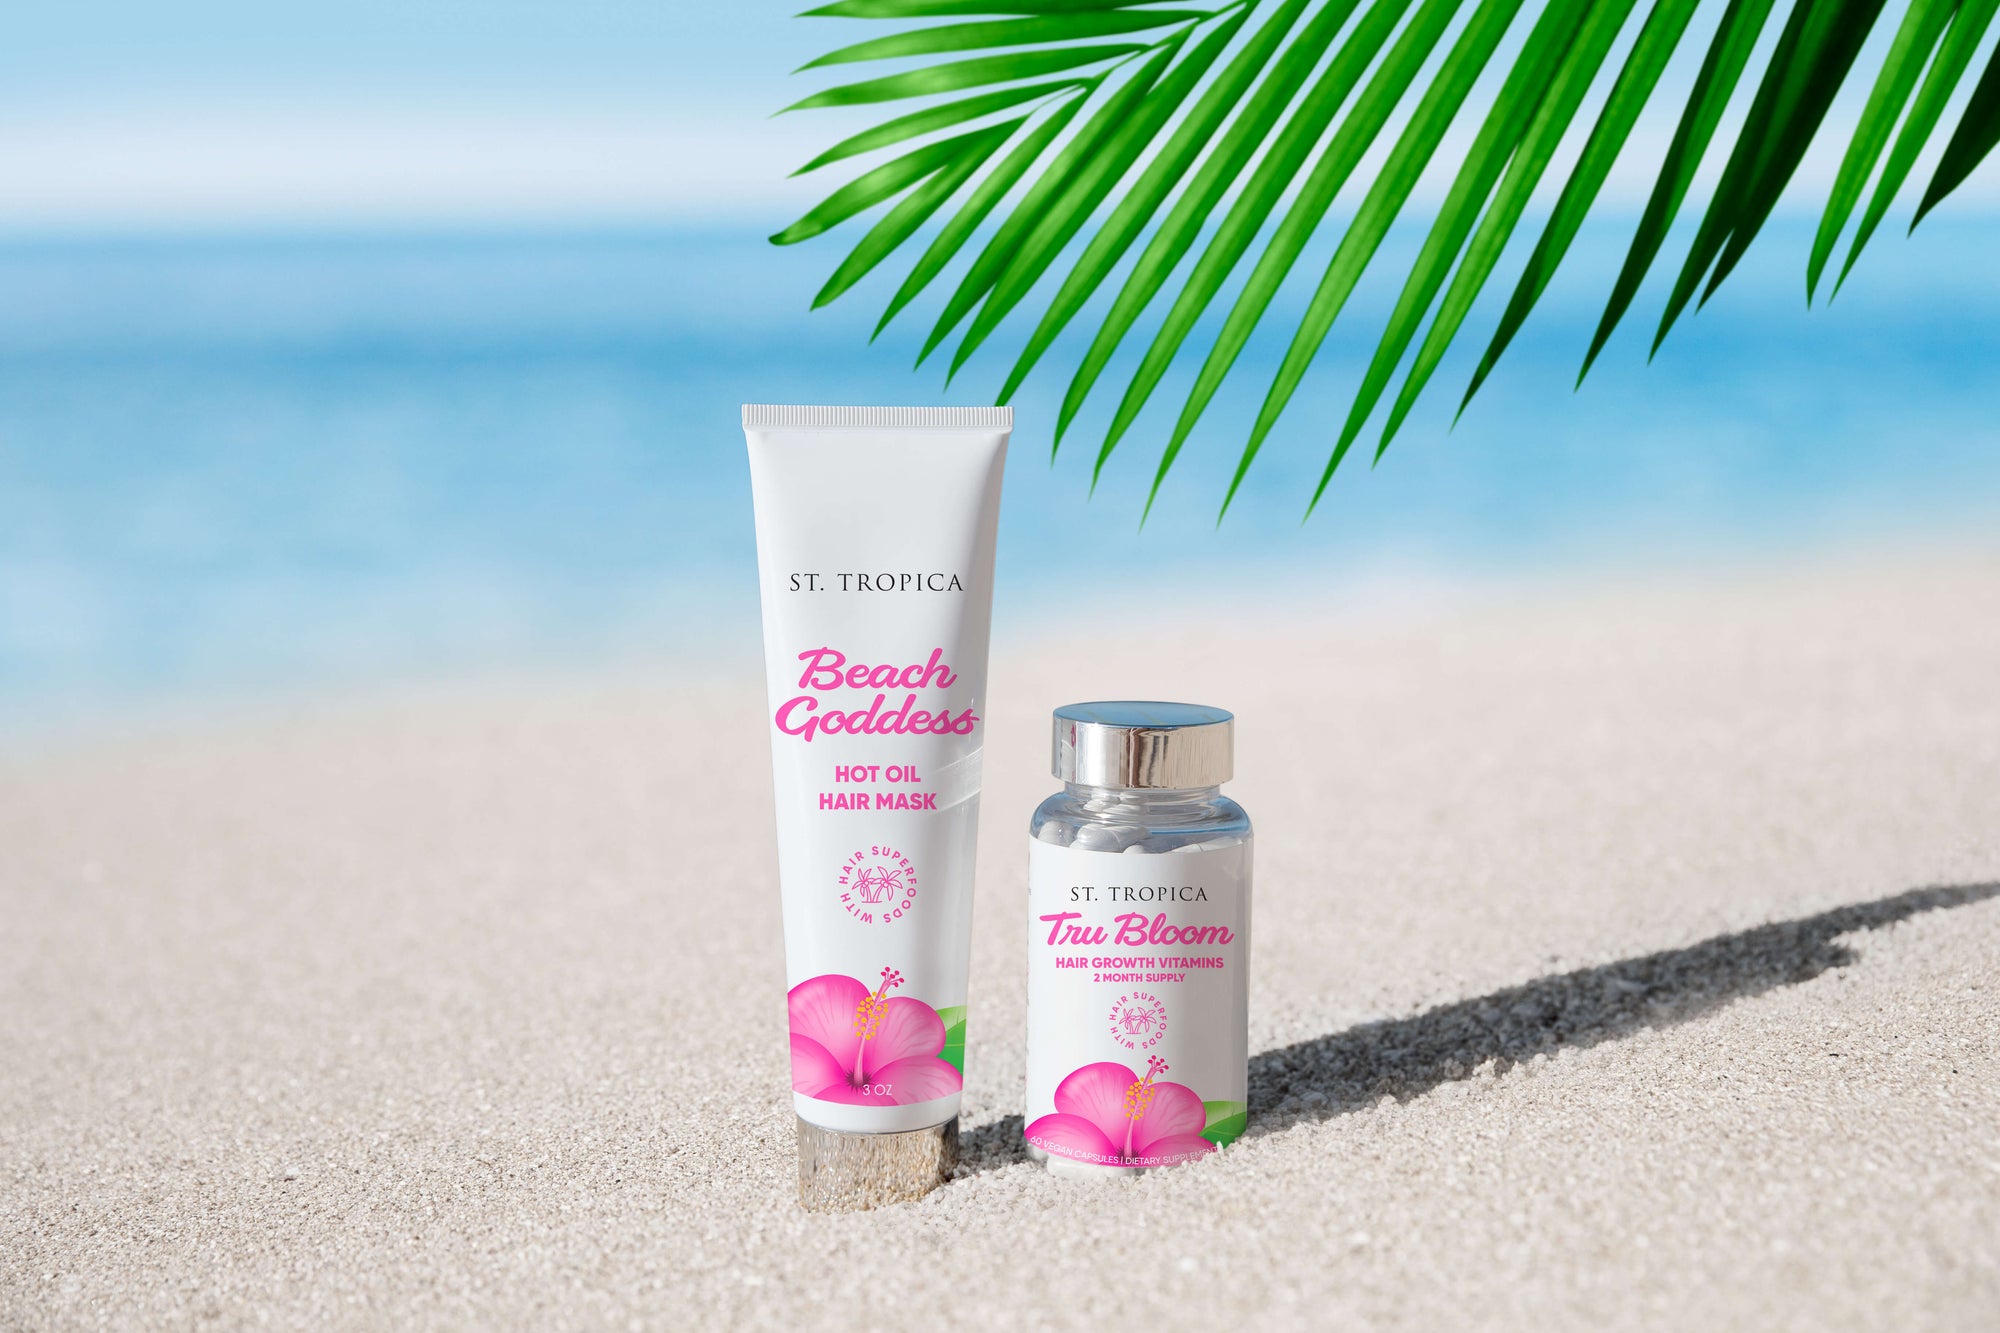 ST.TROPICA Hair Vitamins and Beach Goddess Hot Oil Hair Mask flat lay on sandy beach with a pink hibiscus flower in the middle of them.